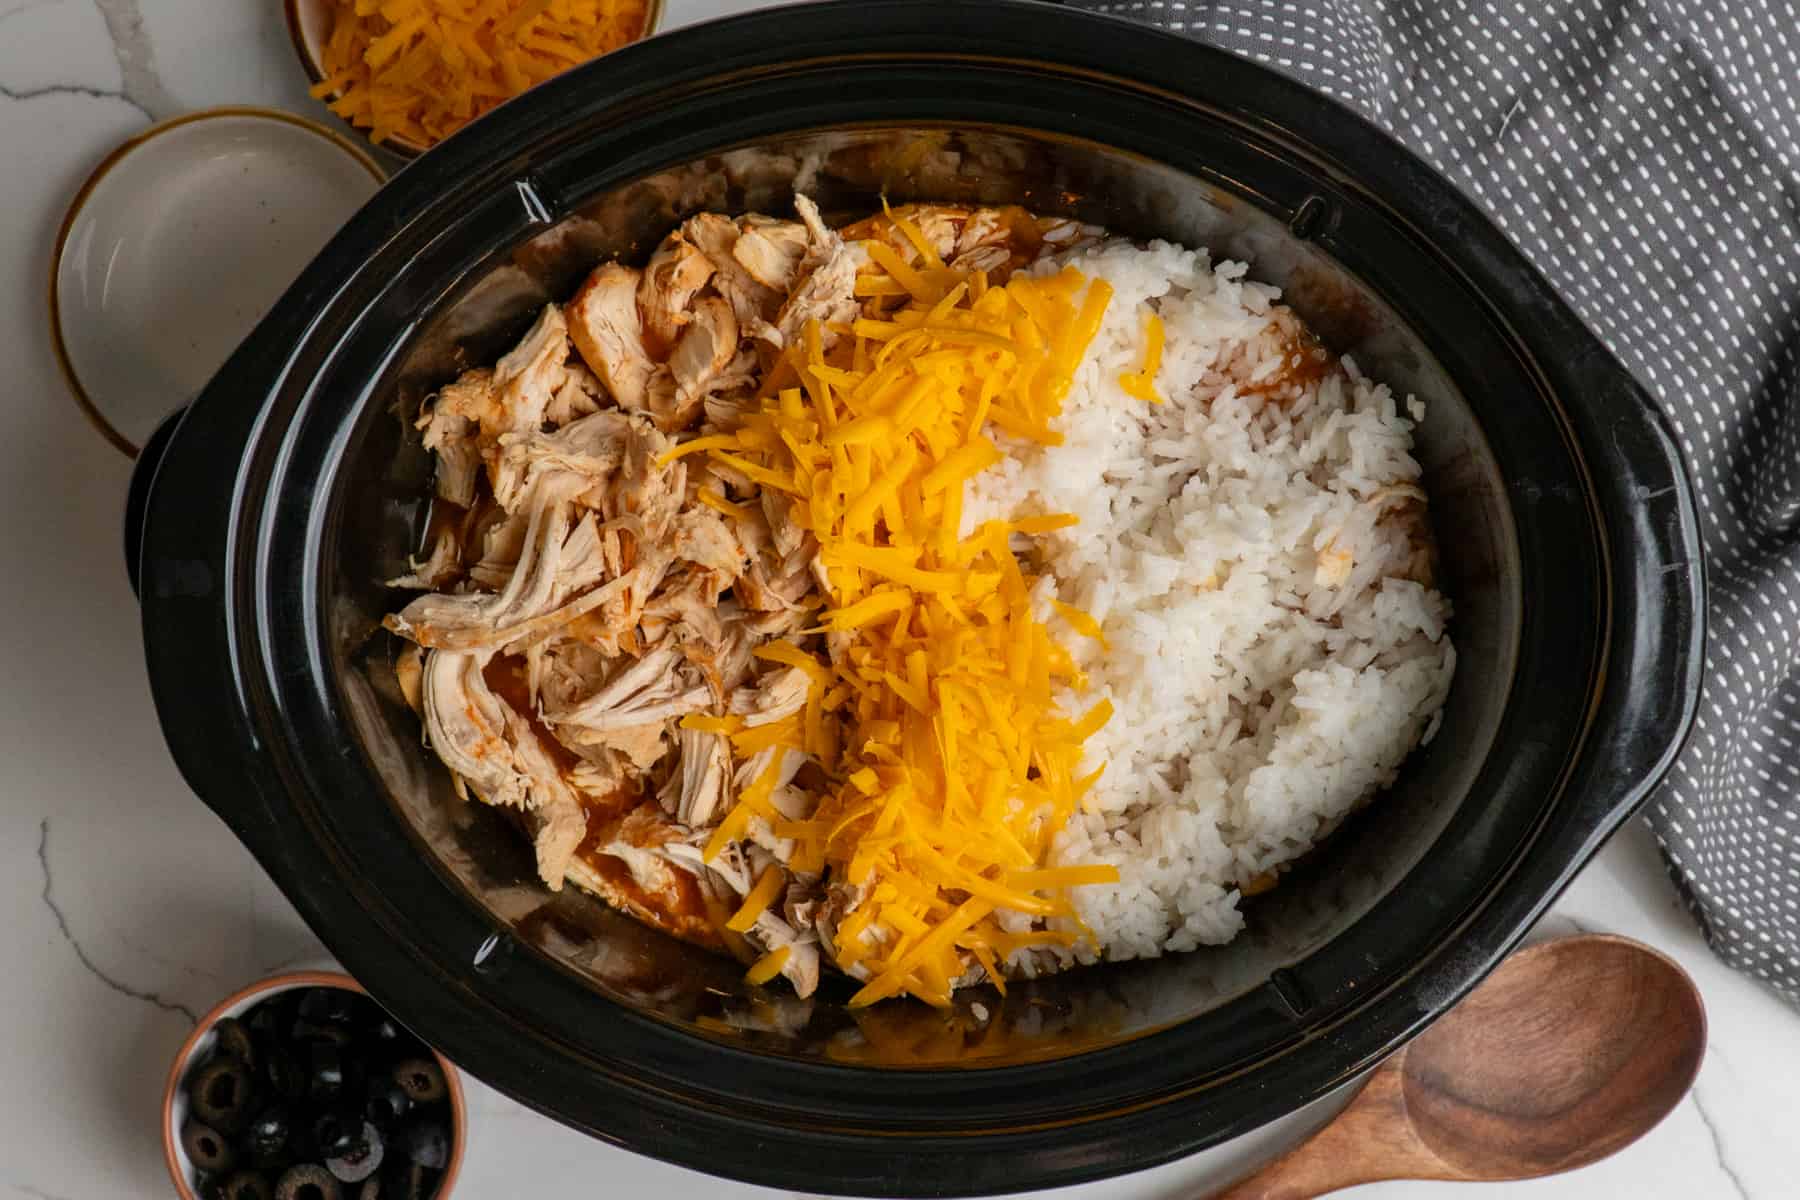 Chicken, cheese and rice in a crock pot.